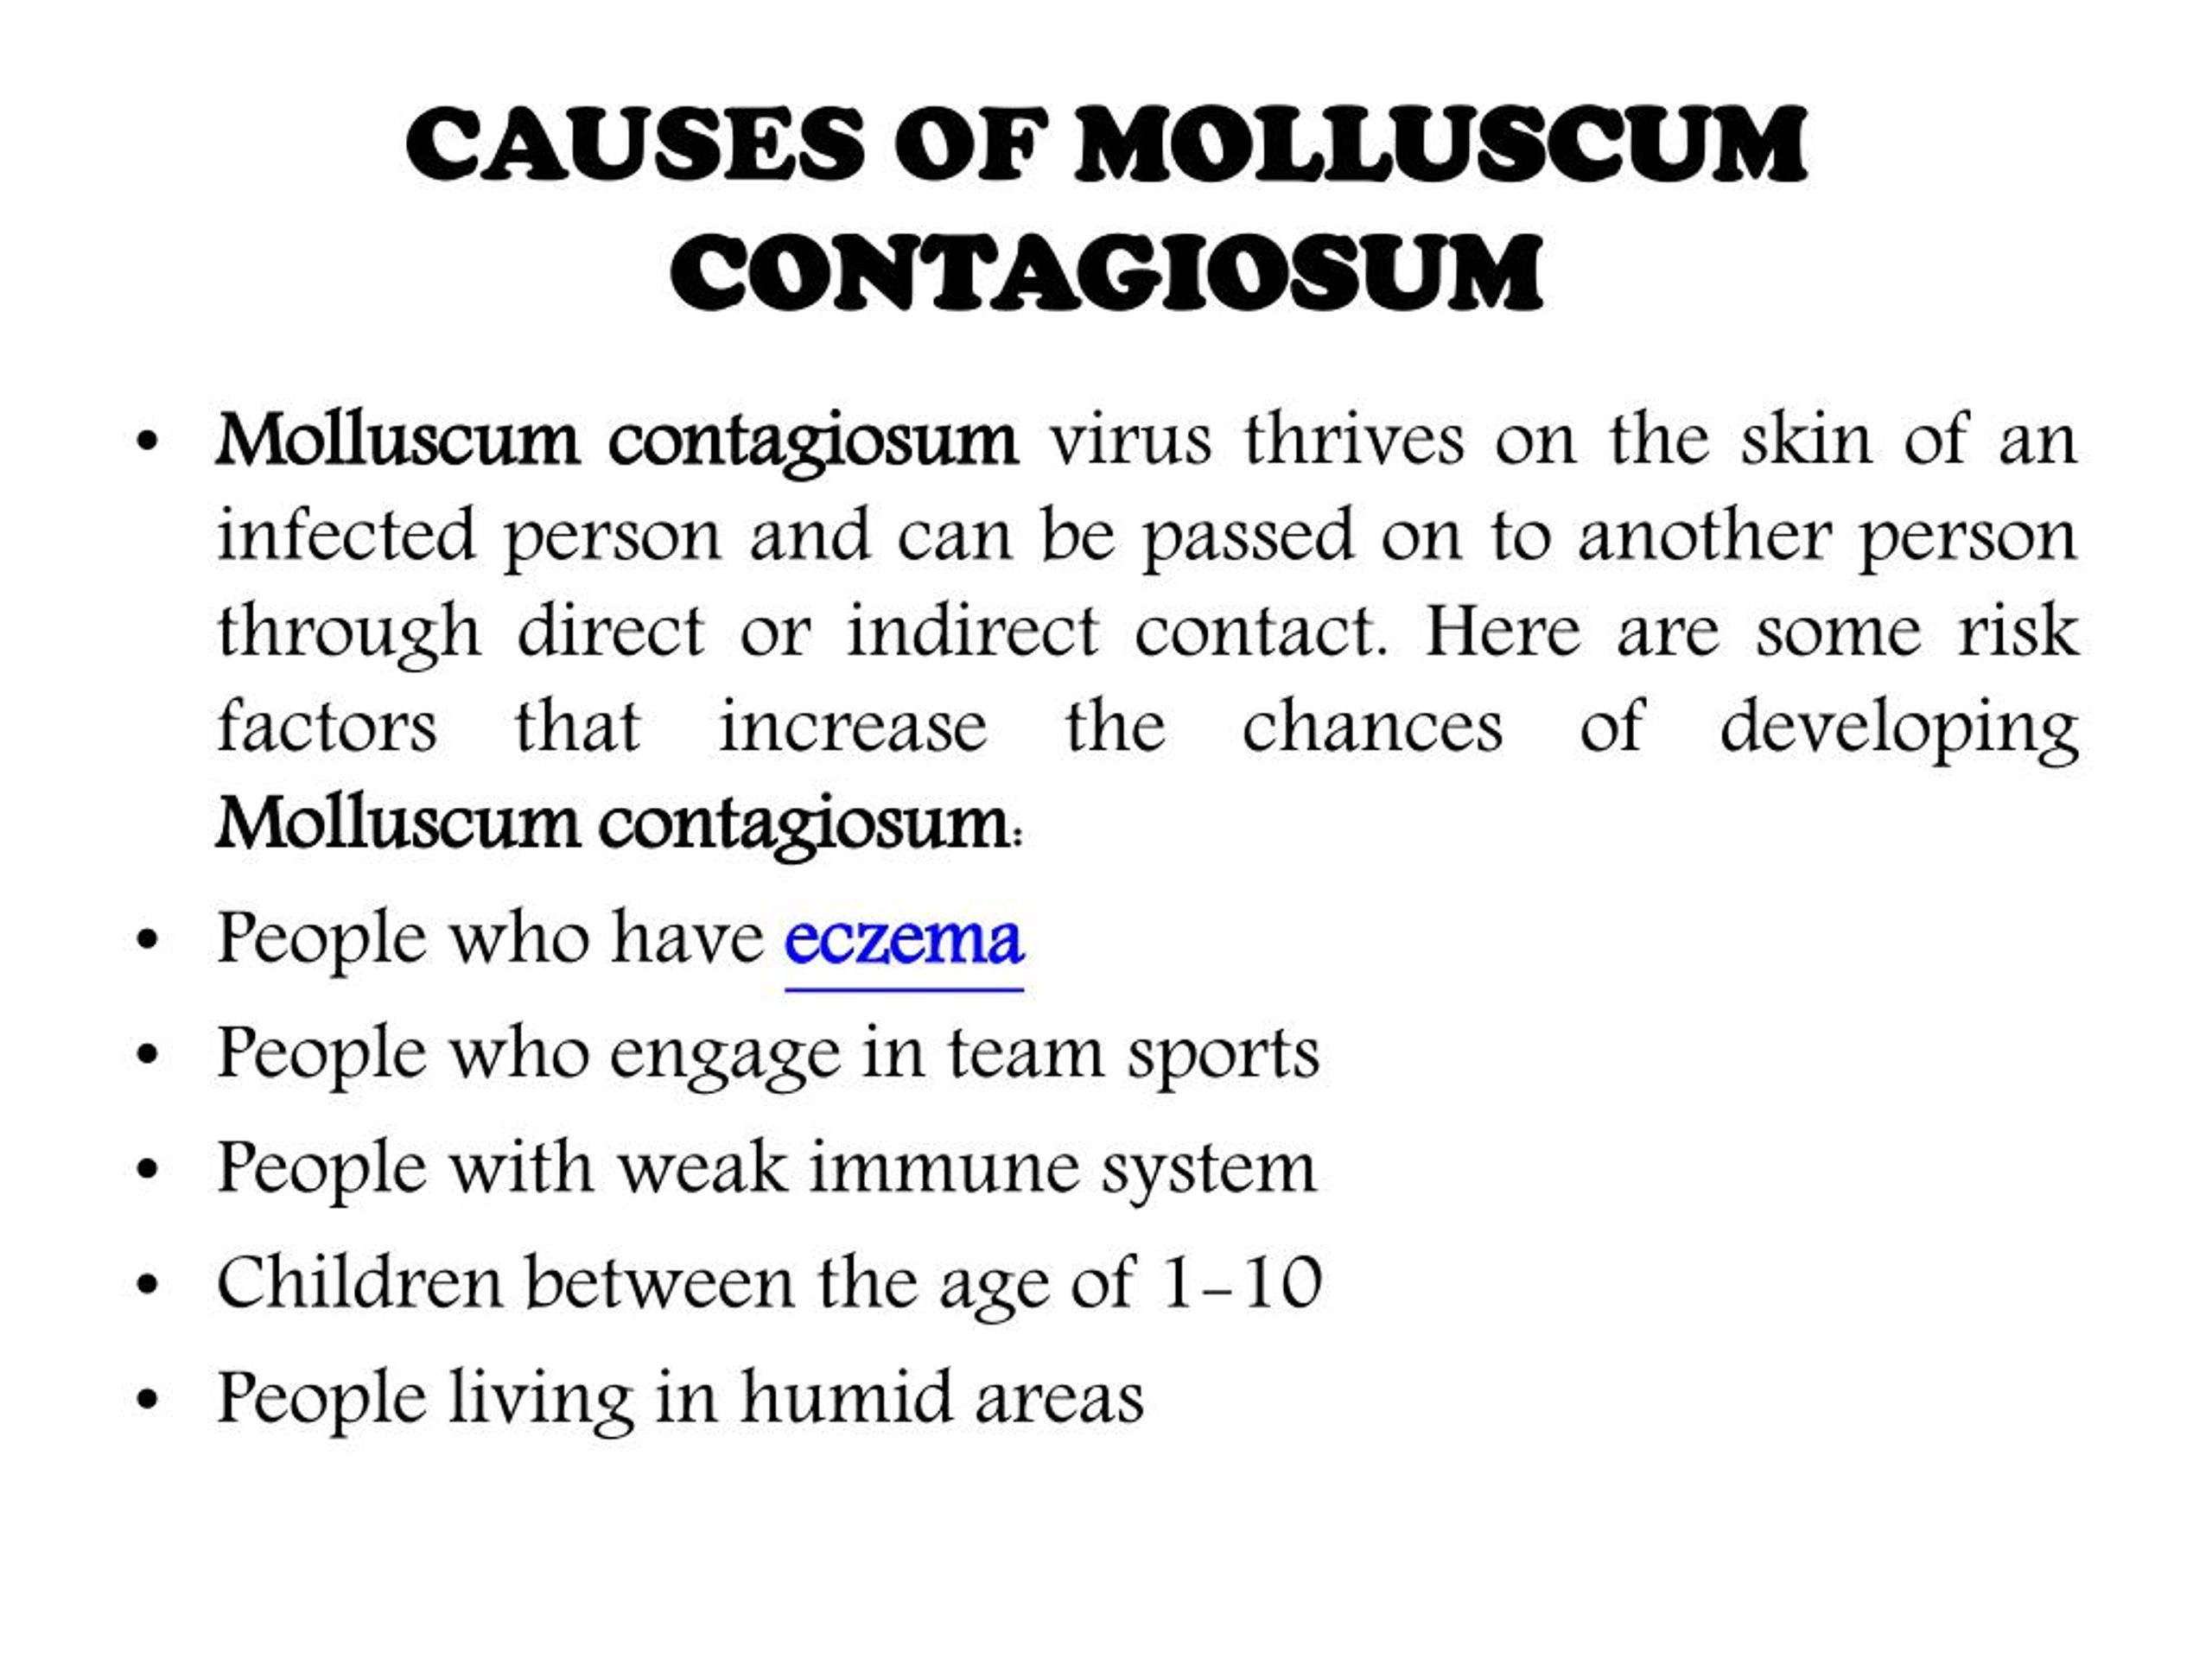 Ppt Molluscum Contagiosum Causes Symptoms And Treatment Powerpoint Presentation Id7542185 3285